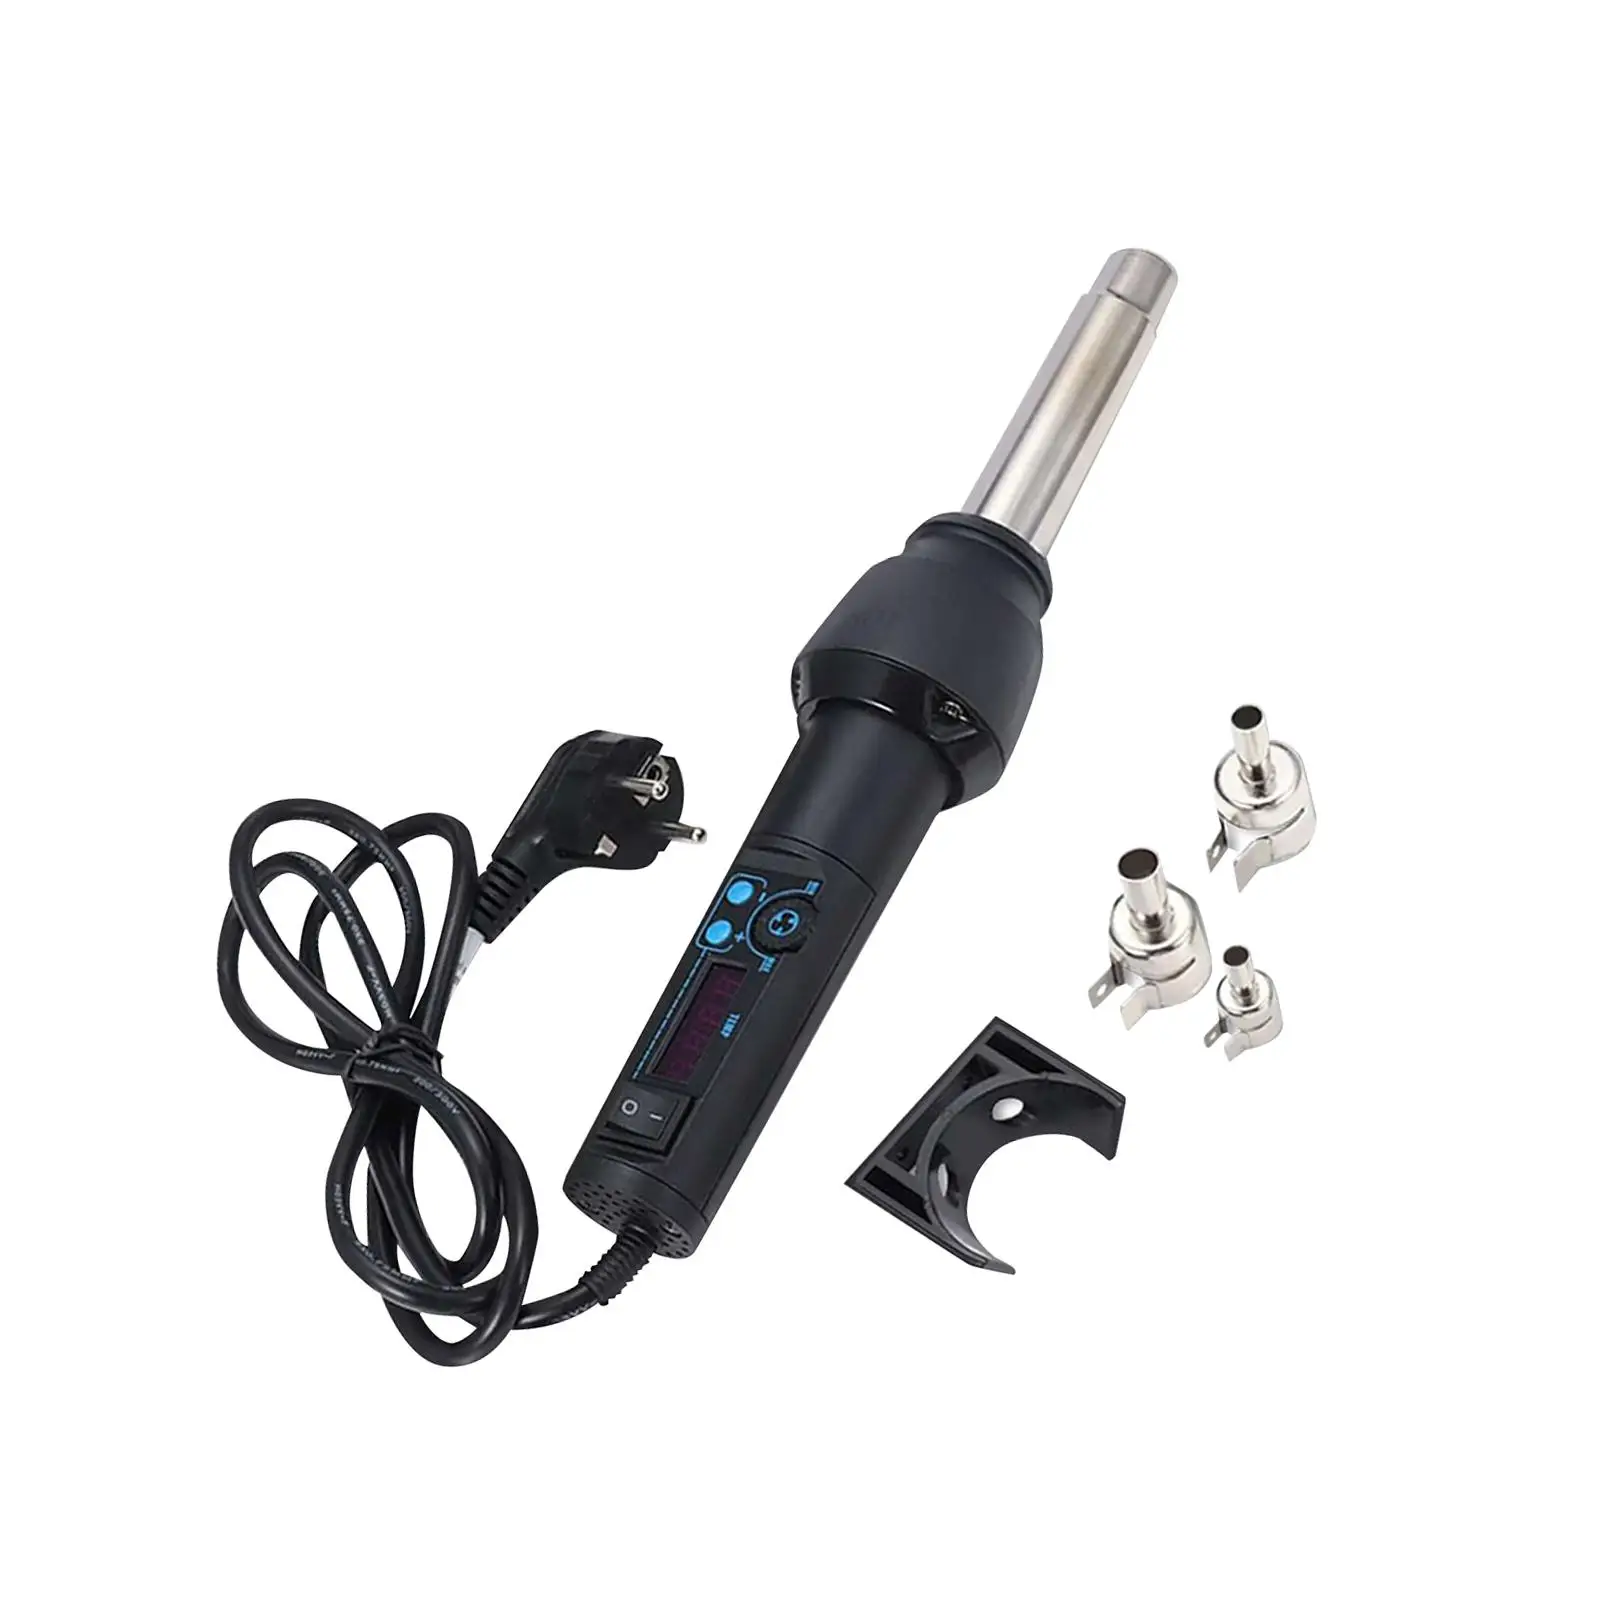 220V Hot Air Pen with LCD Display Fast Heating Temperature Adjustable with Nozzle Electric Handheld Mini Heat Tool for